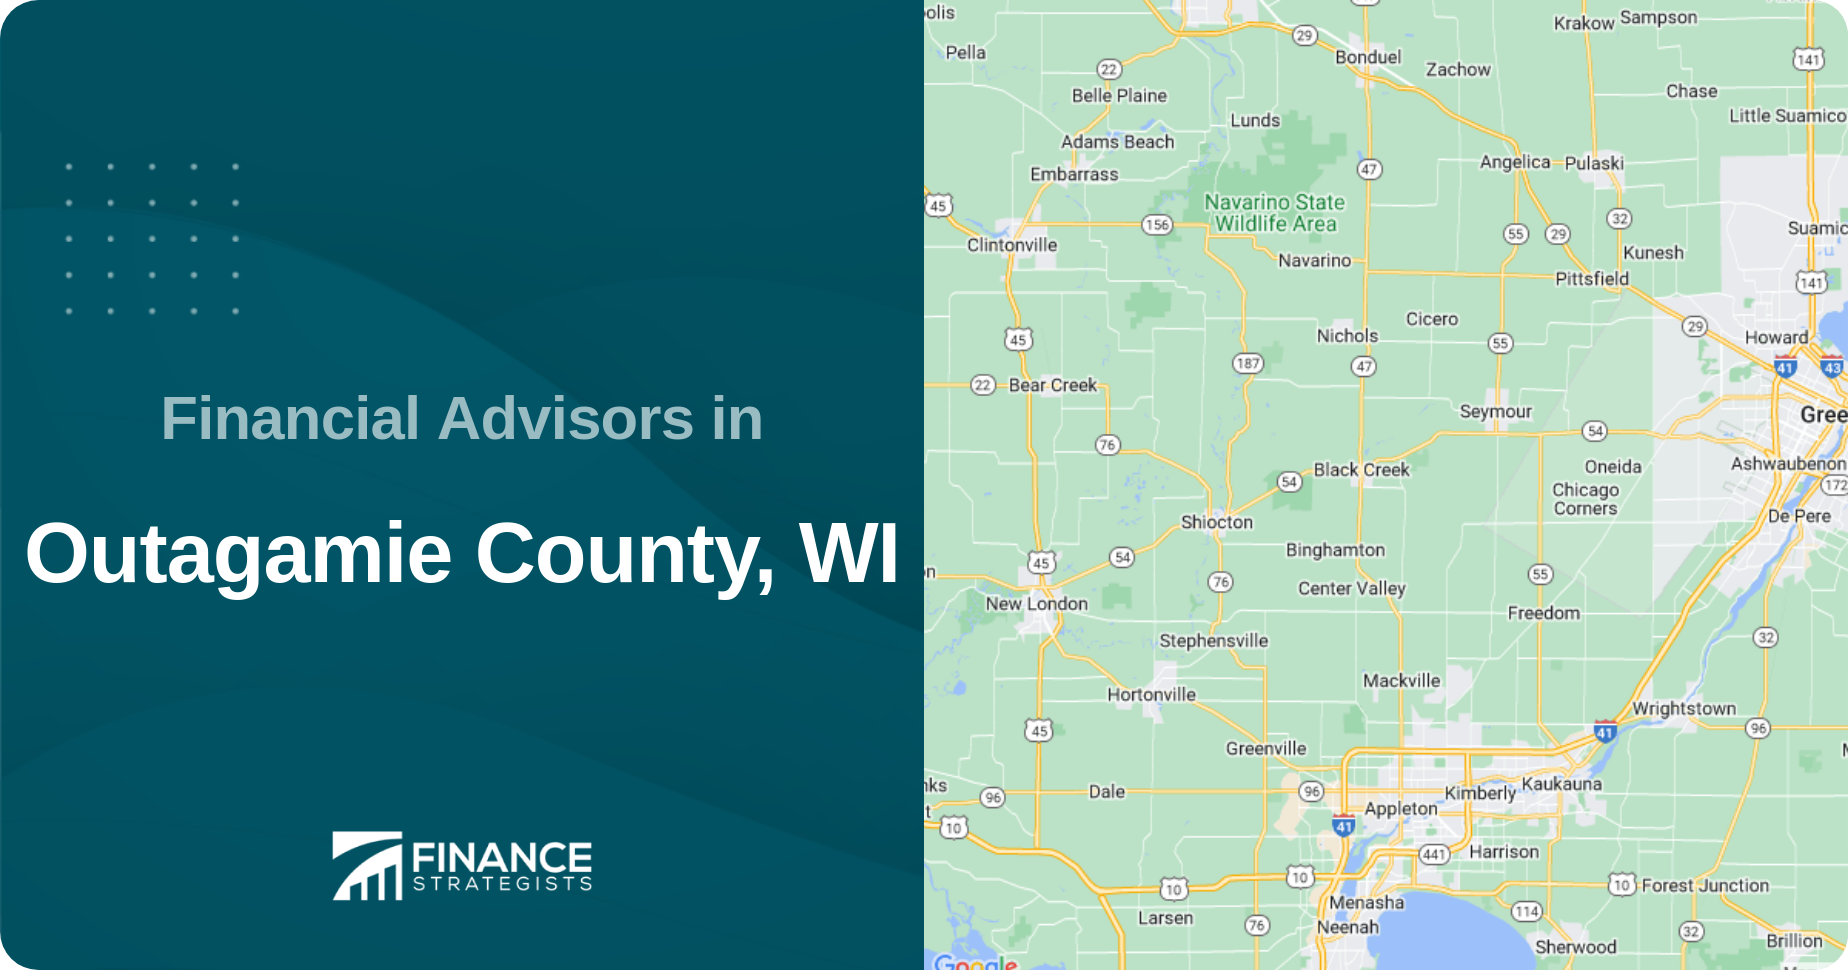 Financial Advisors in Outagamie County, WI